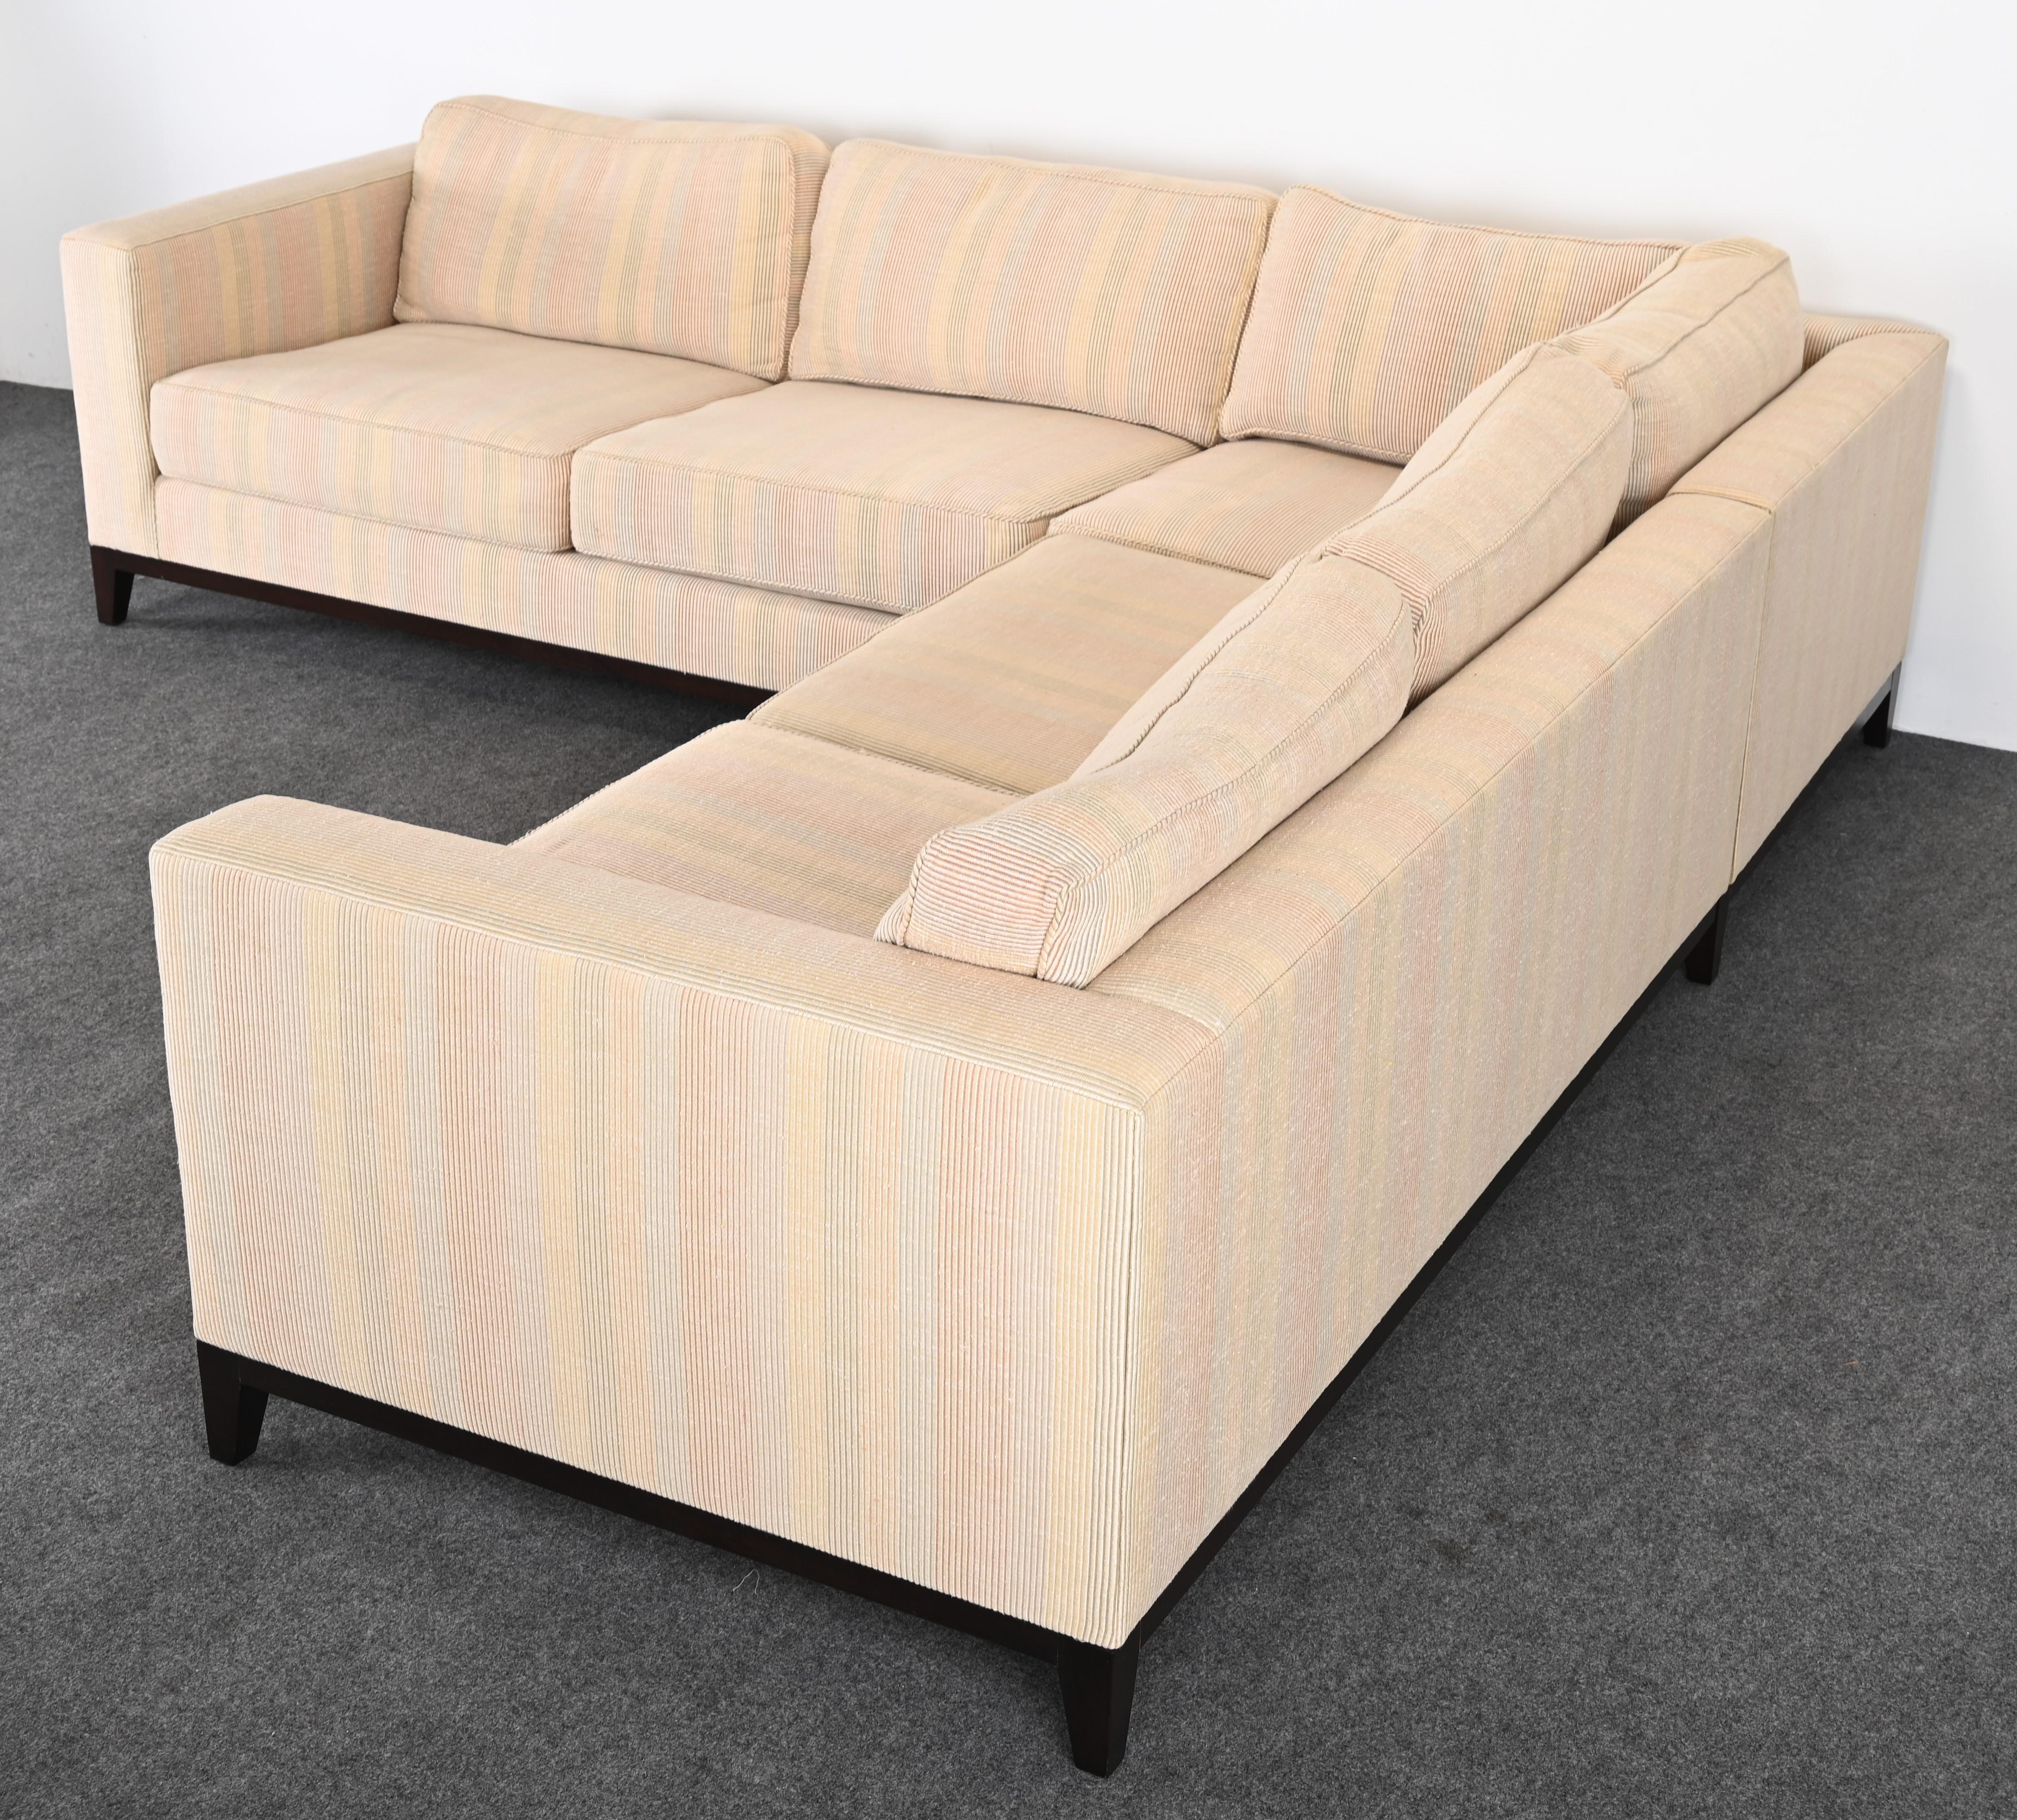 Upholstery Designer Sectional Sofa by Christian Liaigre at Holly Hunt, 21st Century